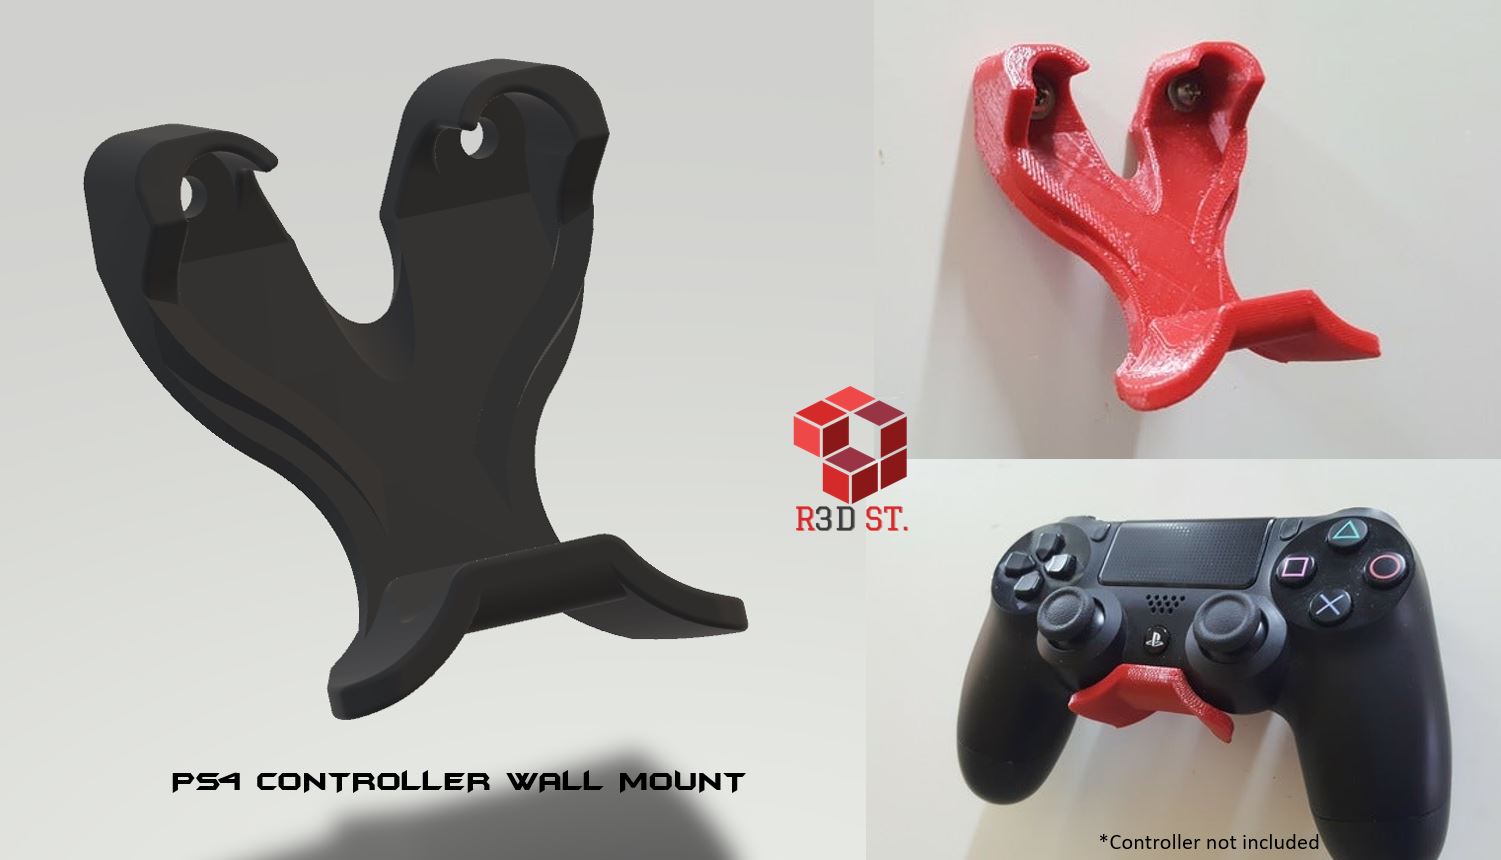 PS4 CONTROLLER WALL MOUNT: Buy sell 